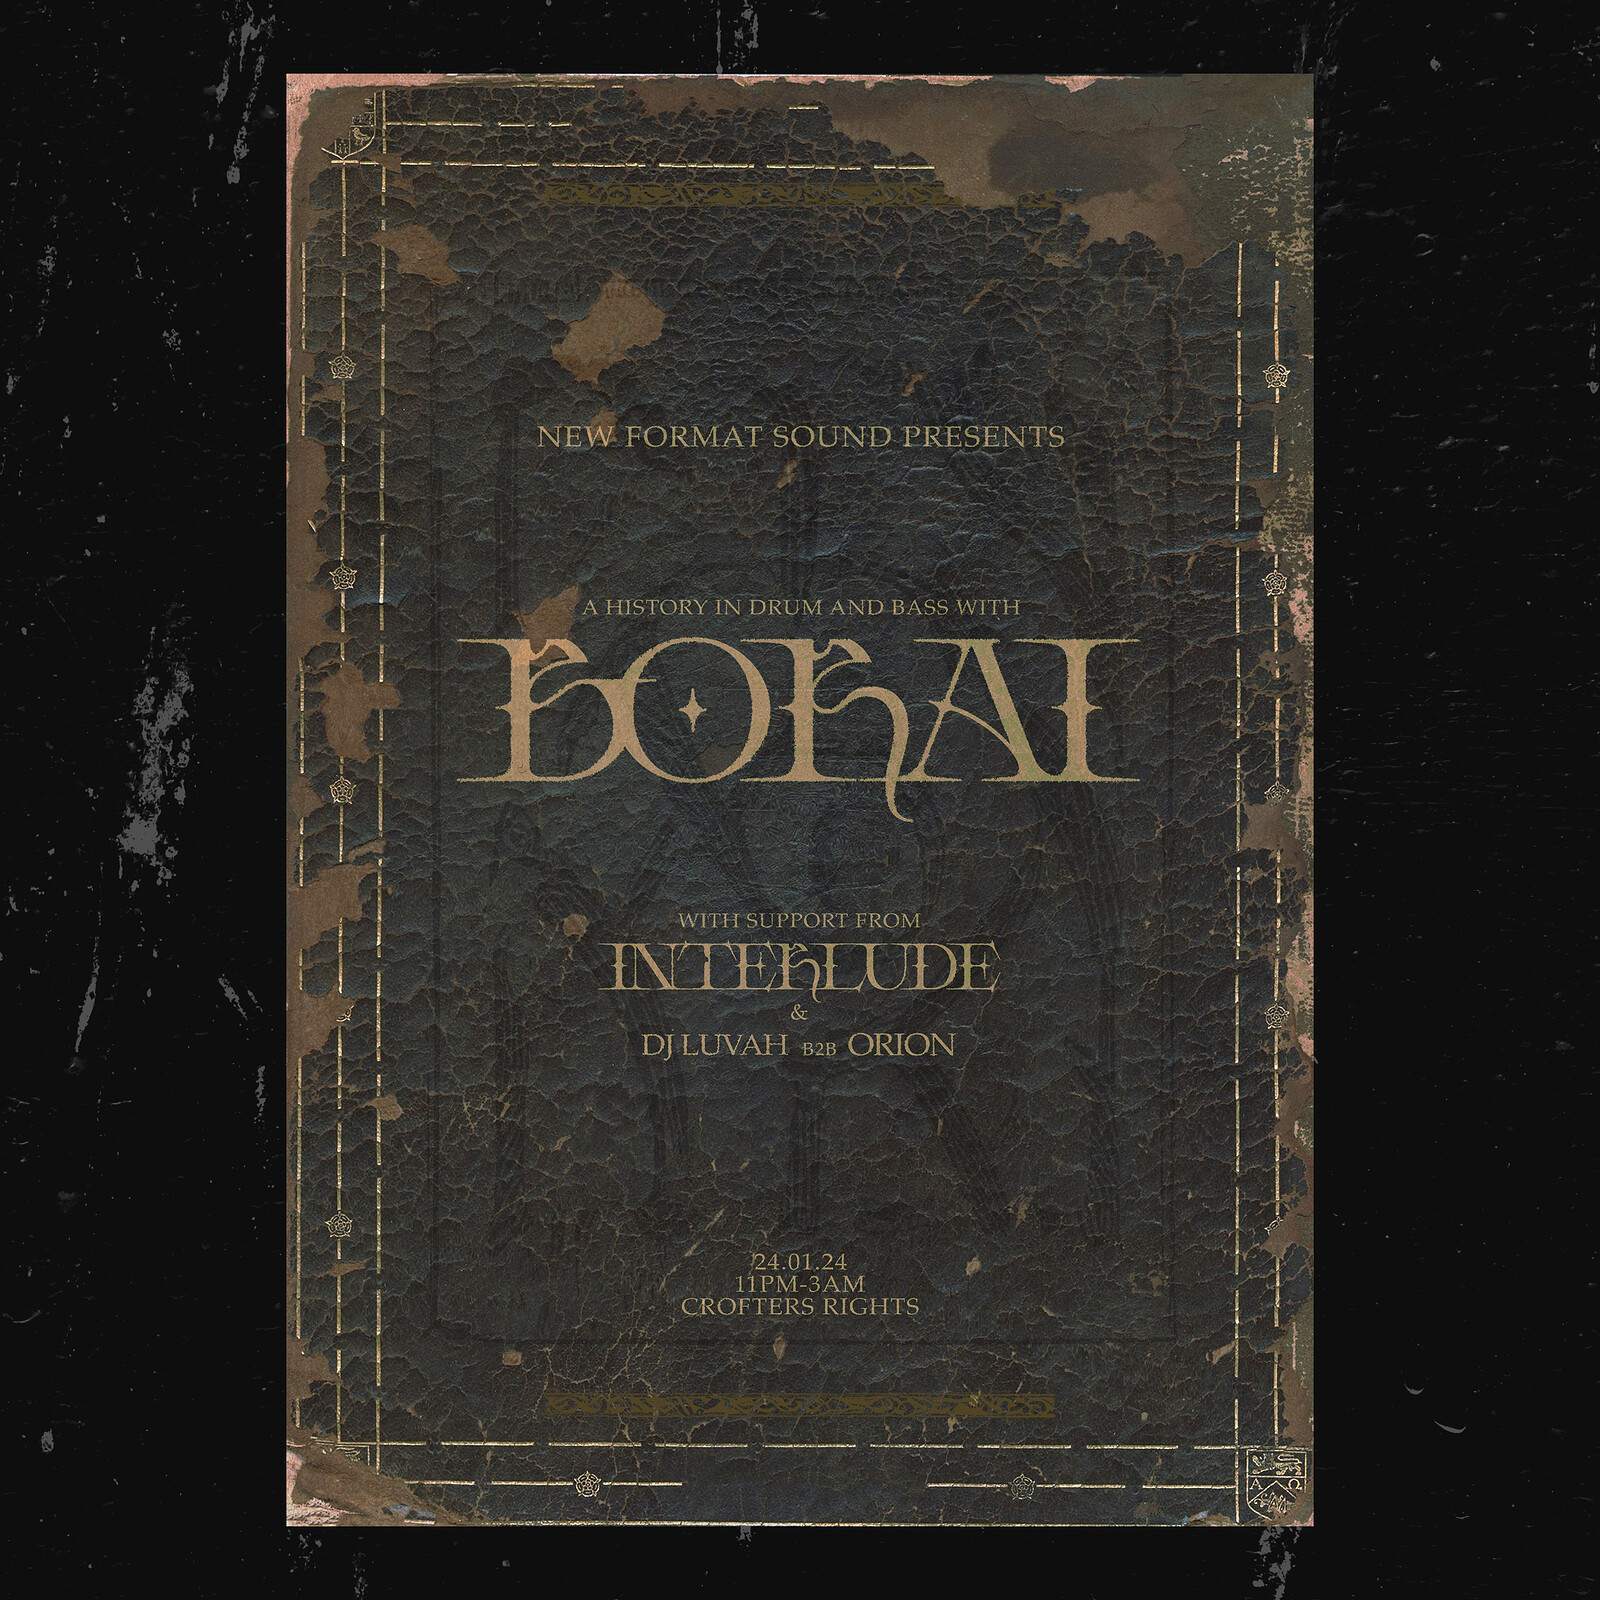 A History in Drum and Bass, with Borai - Página frontal